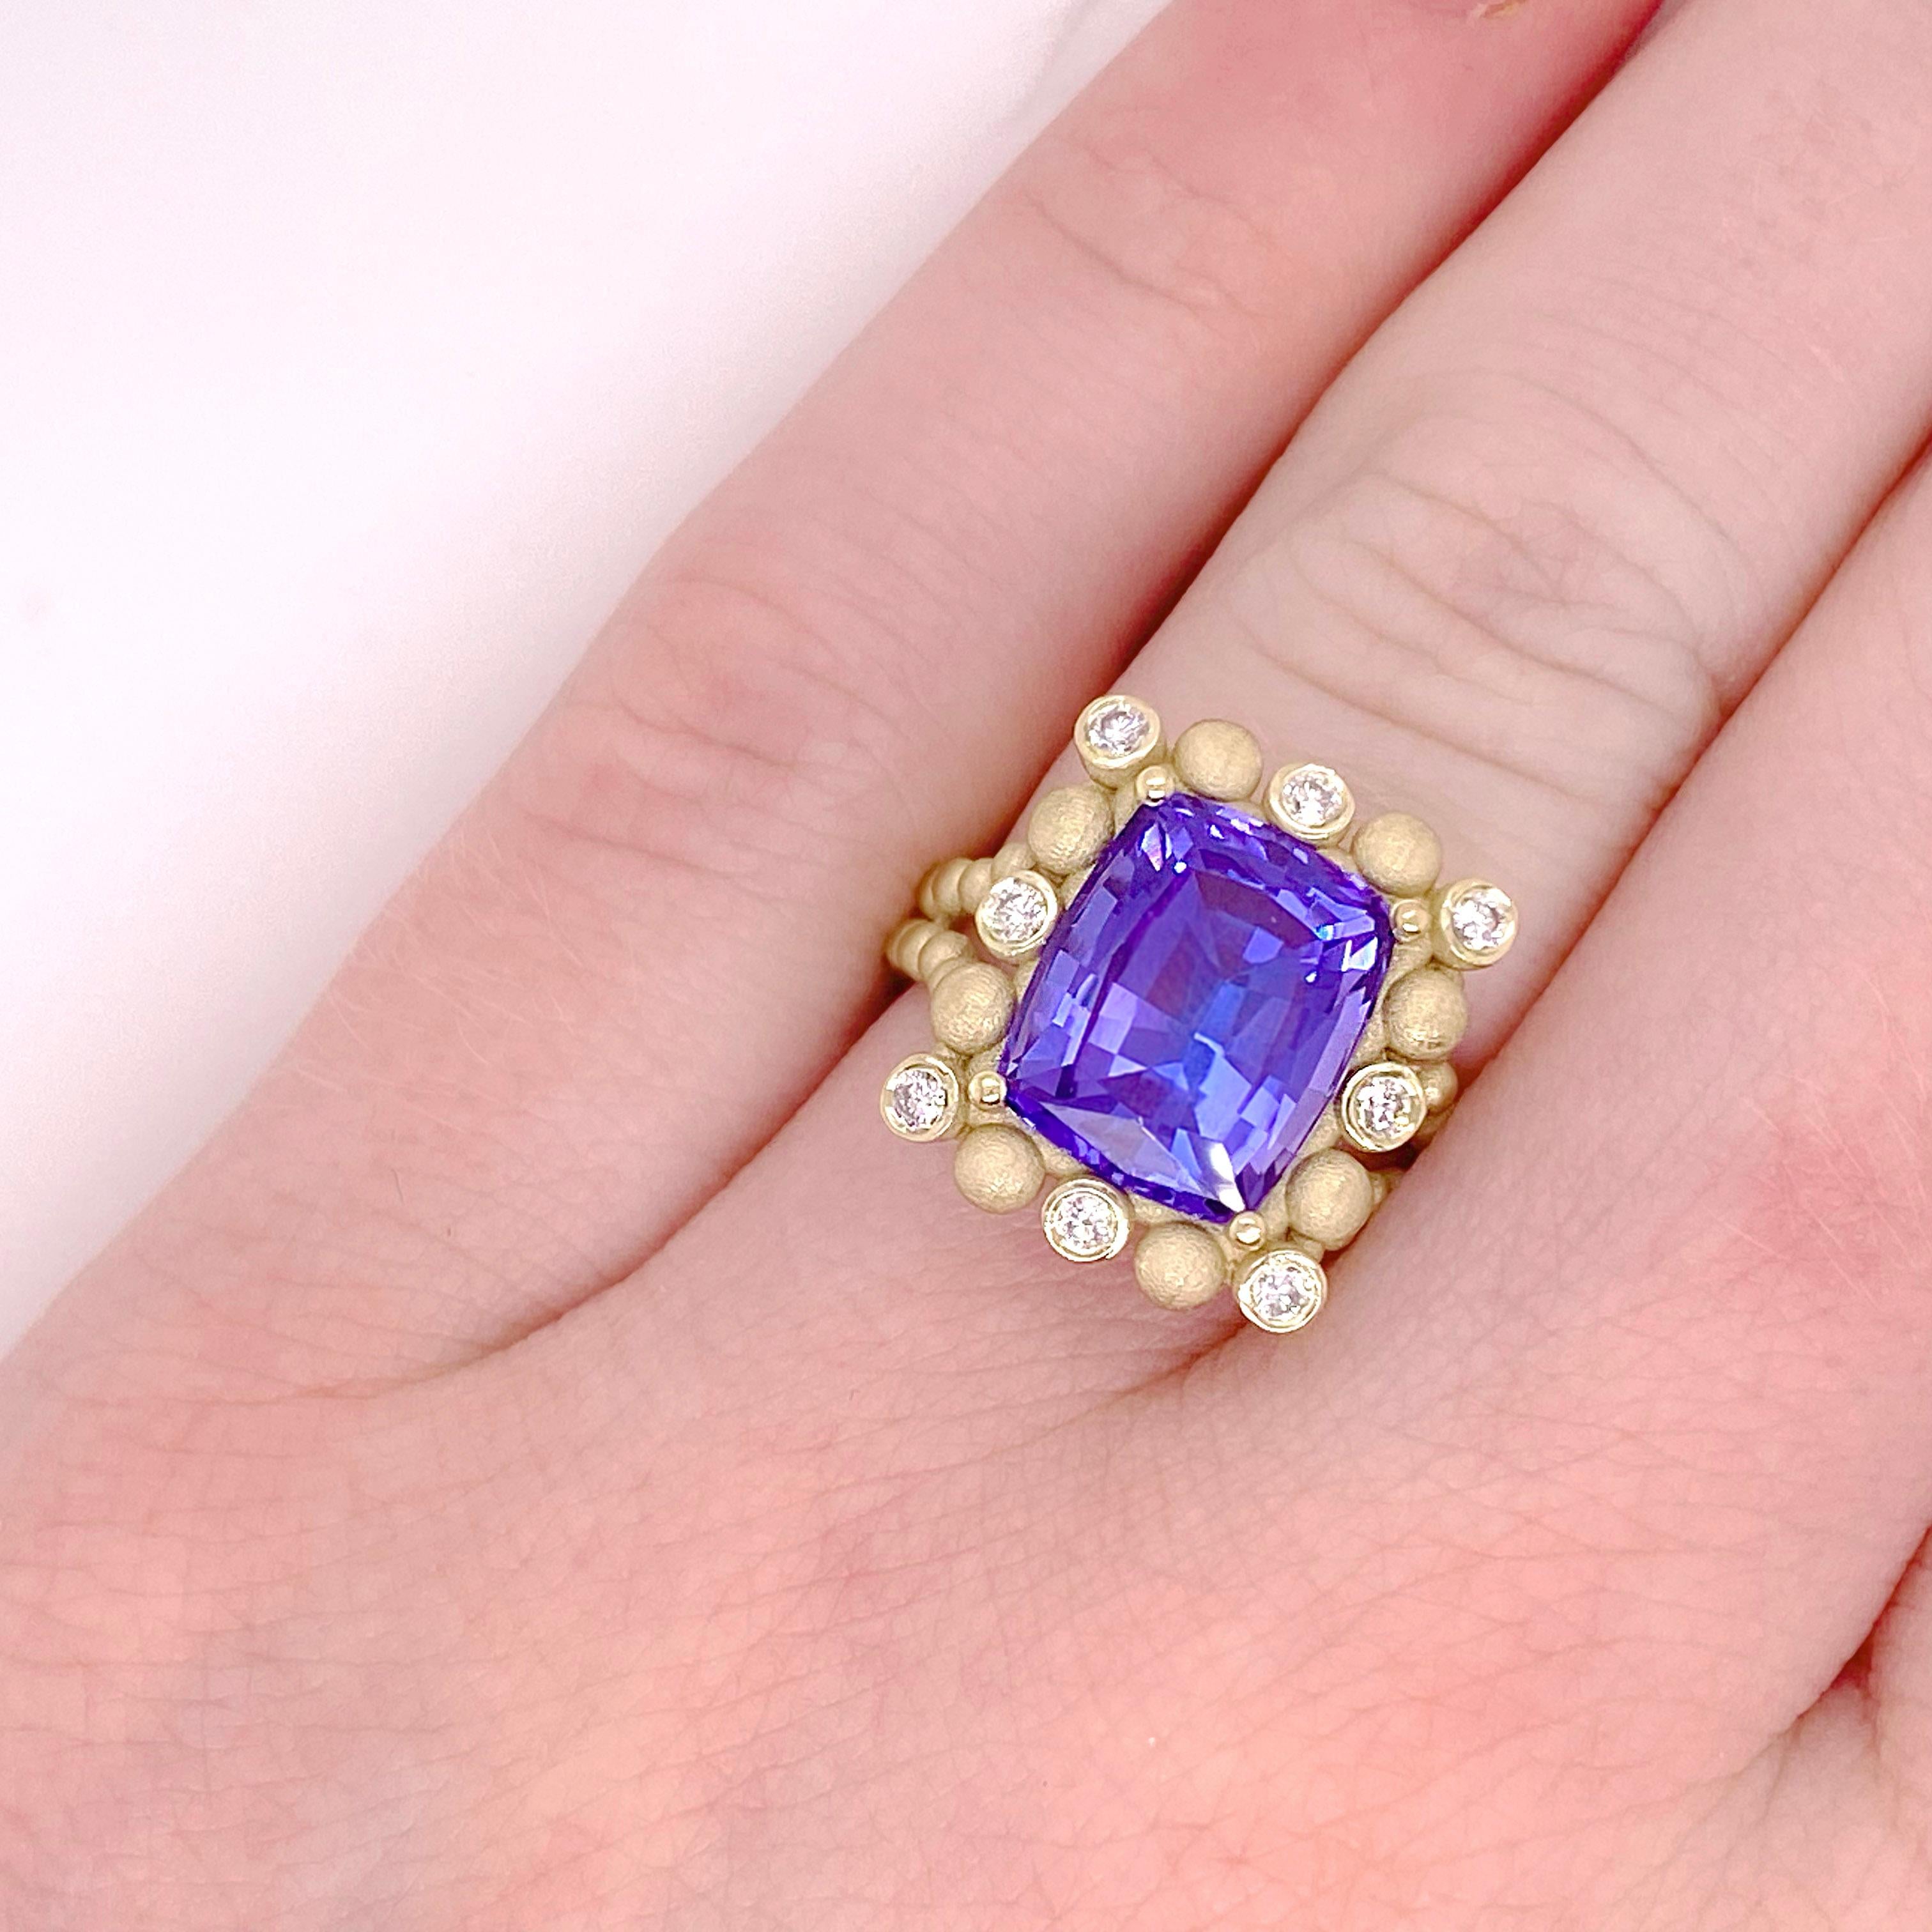 One-of-a-kind, custom made Tanzanite ring. This ring is an authentic Five Star Jewelry original design. The ring is made with 14 karat yellow gold and holds a genuine tanzanite gemstones that weighs over 5 carats!! Framing the center stone are